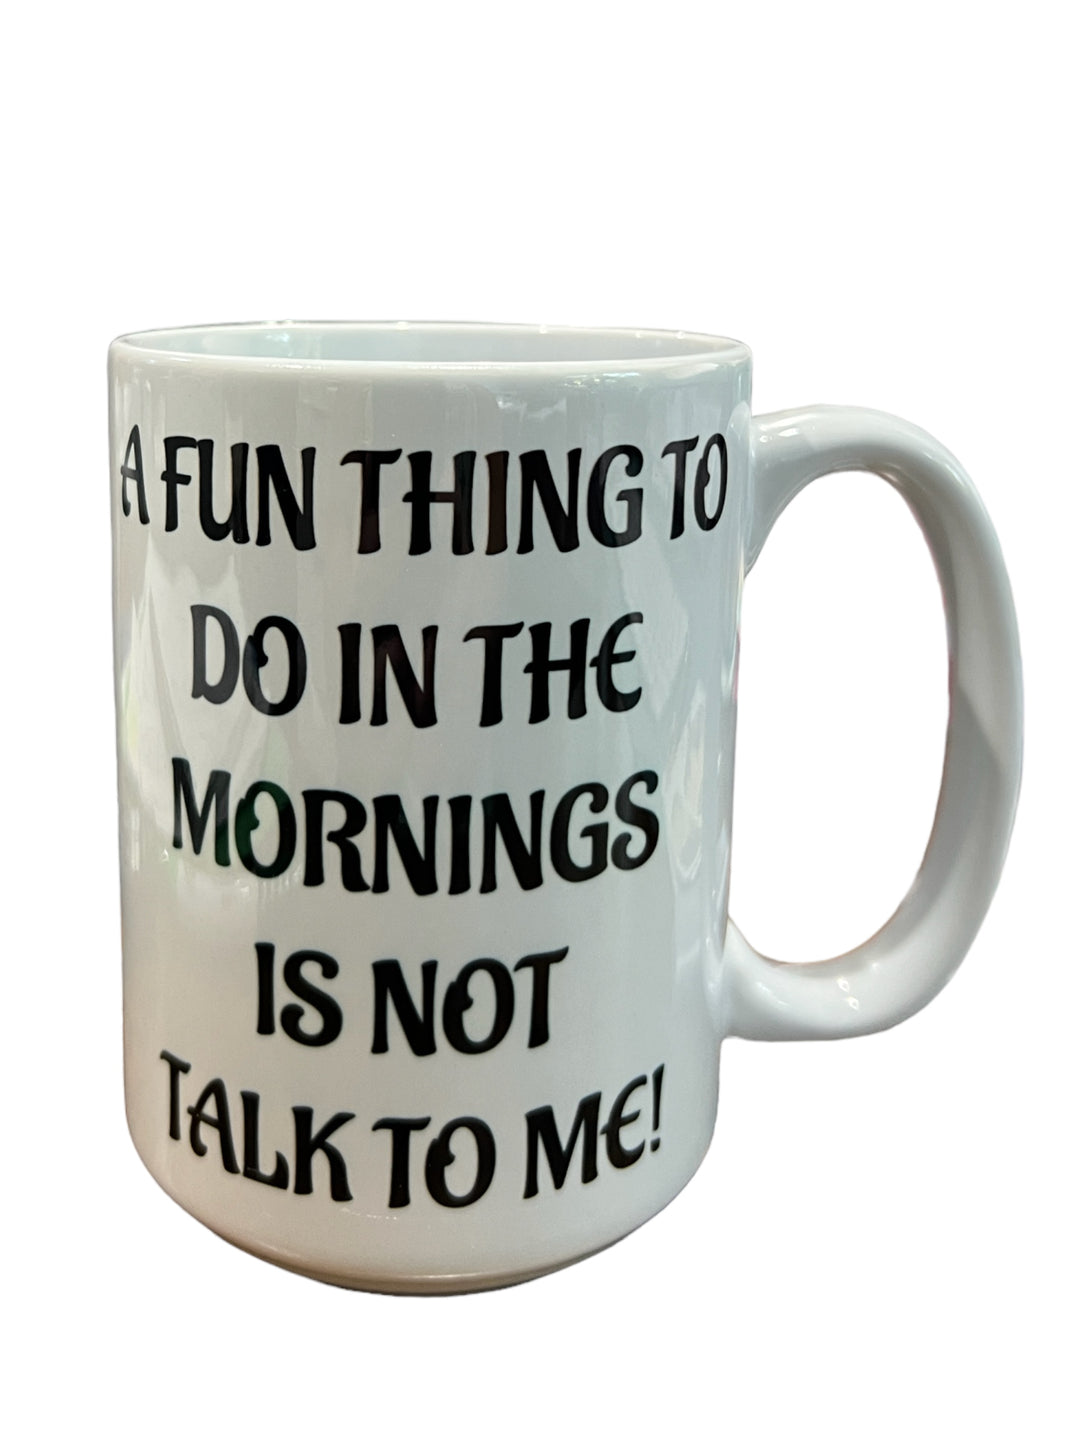 A fun thing to do in the mornings is not talk to me - funny - ceramic mug